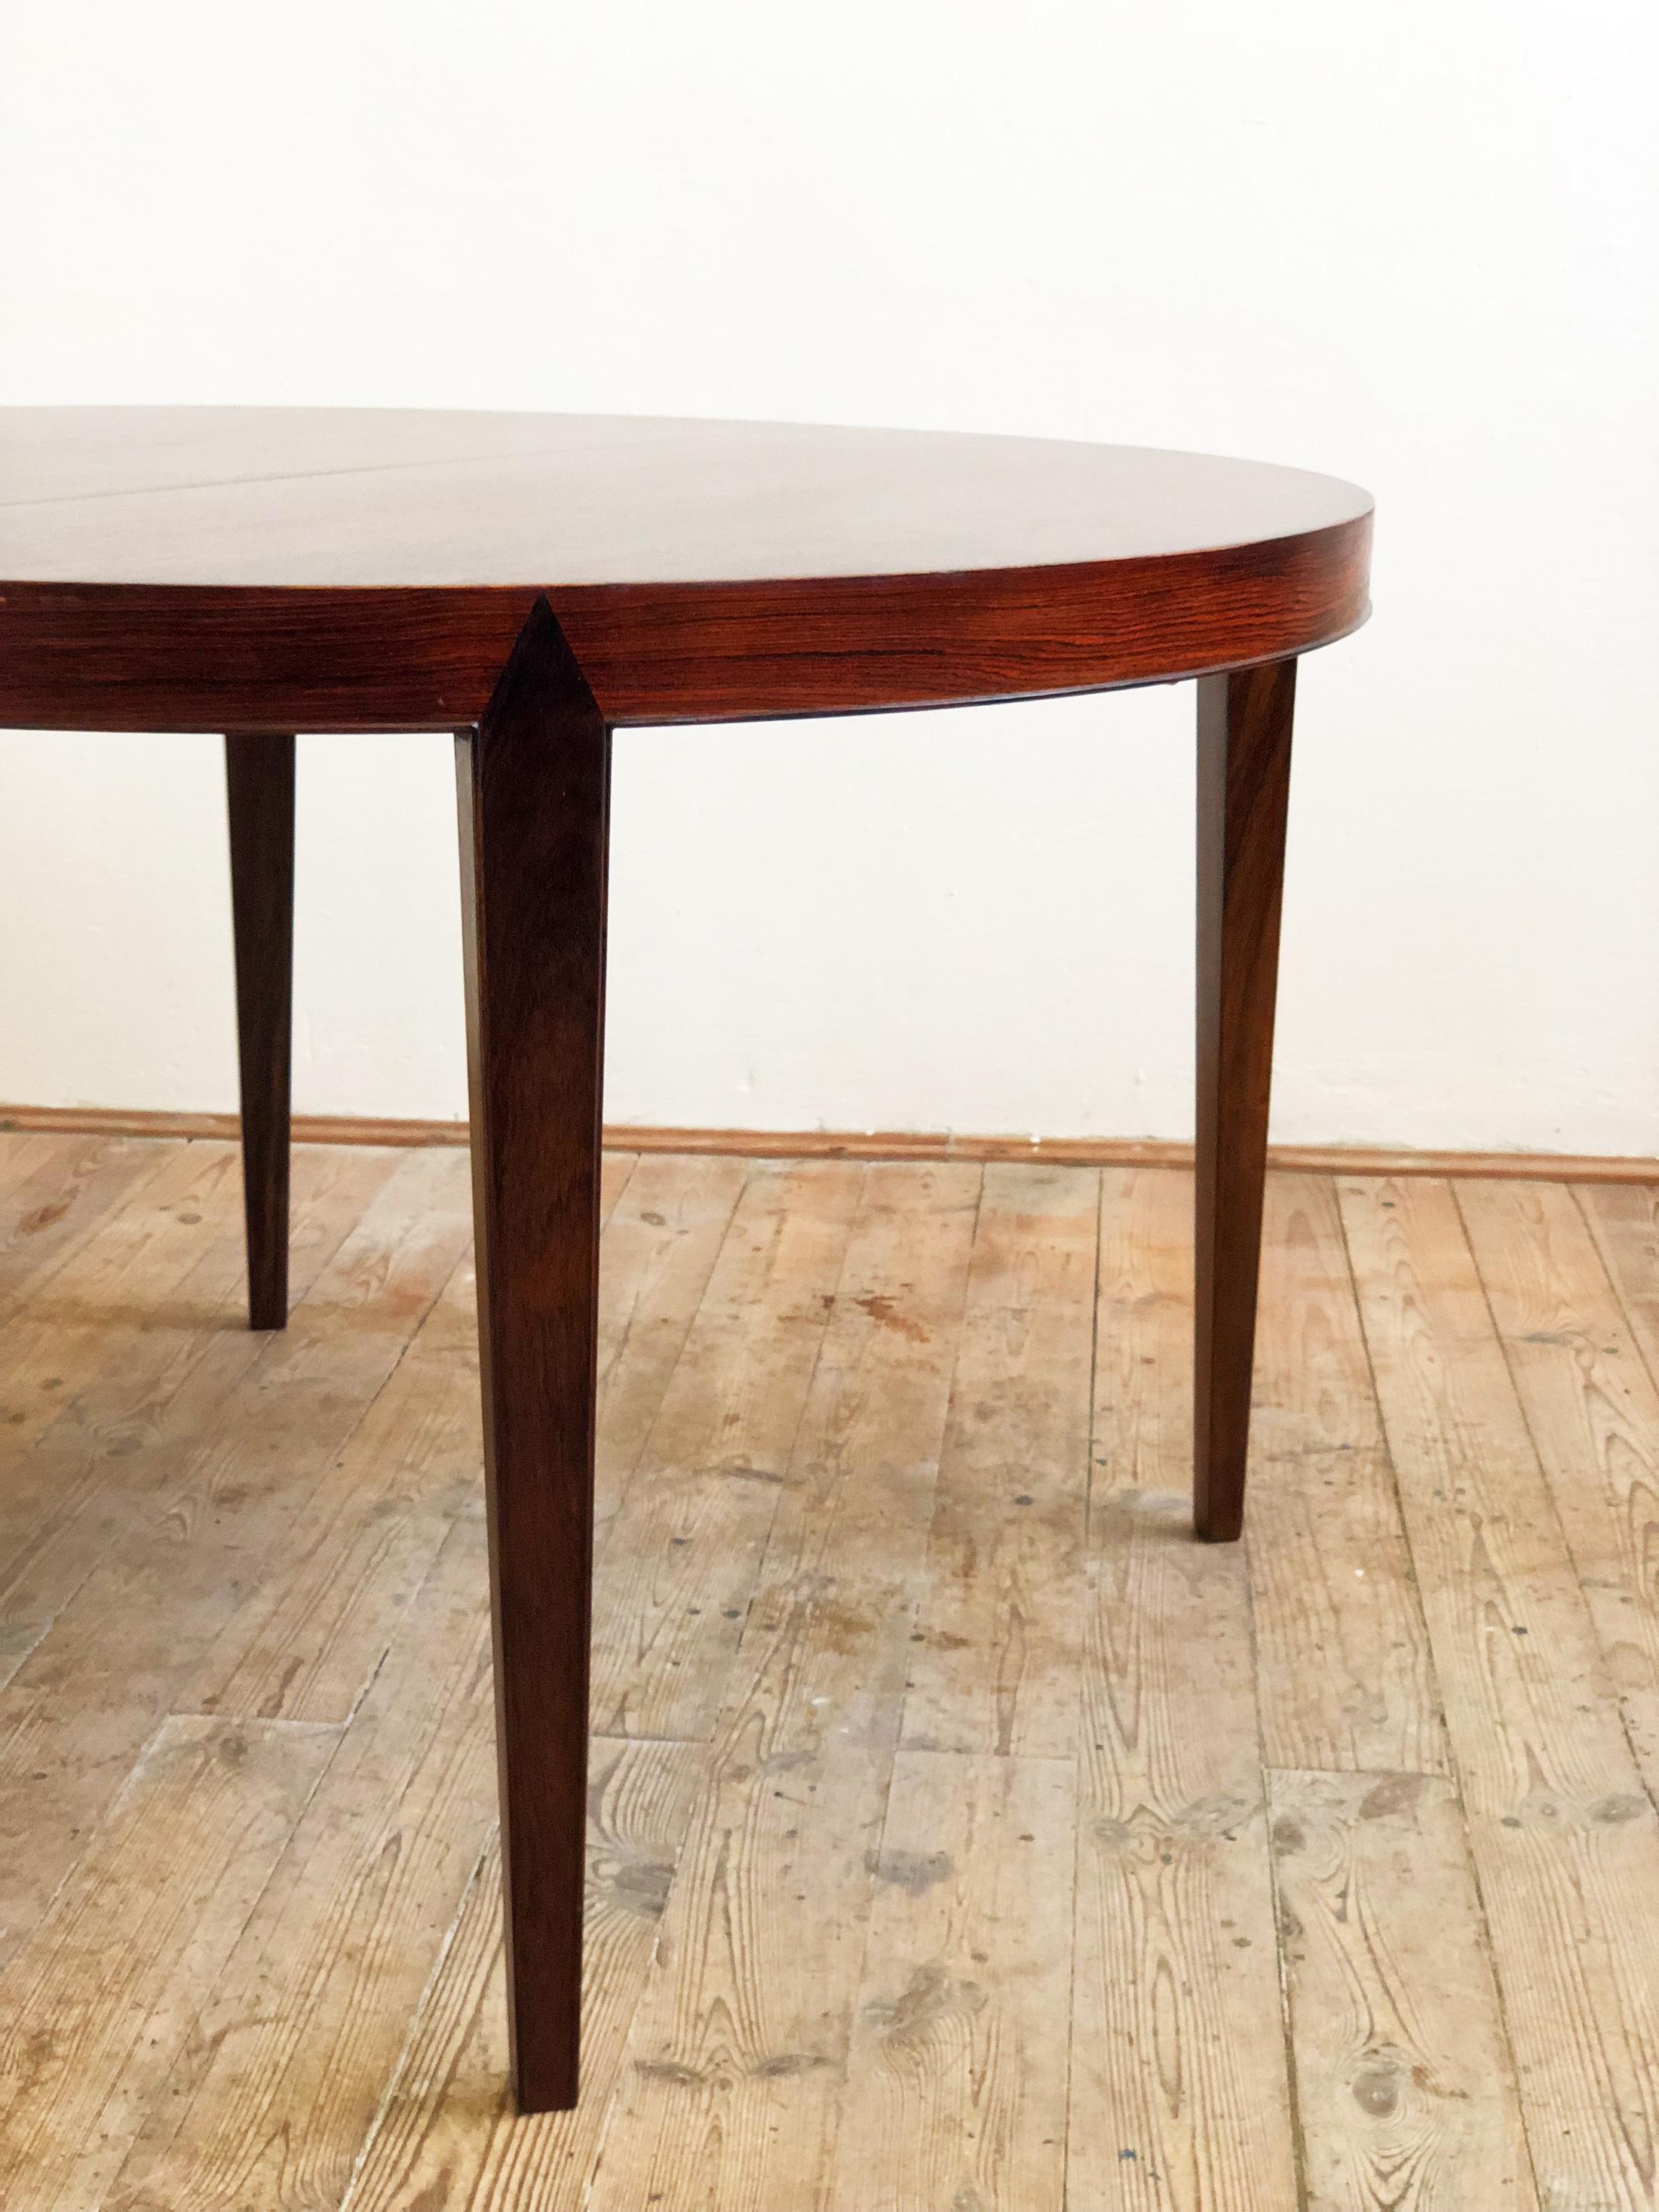 Mid-20th Century Extendable Rosewood Dining Table by Severin Hansen for Haslev Møbelsnedkeri For Sale